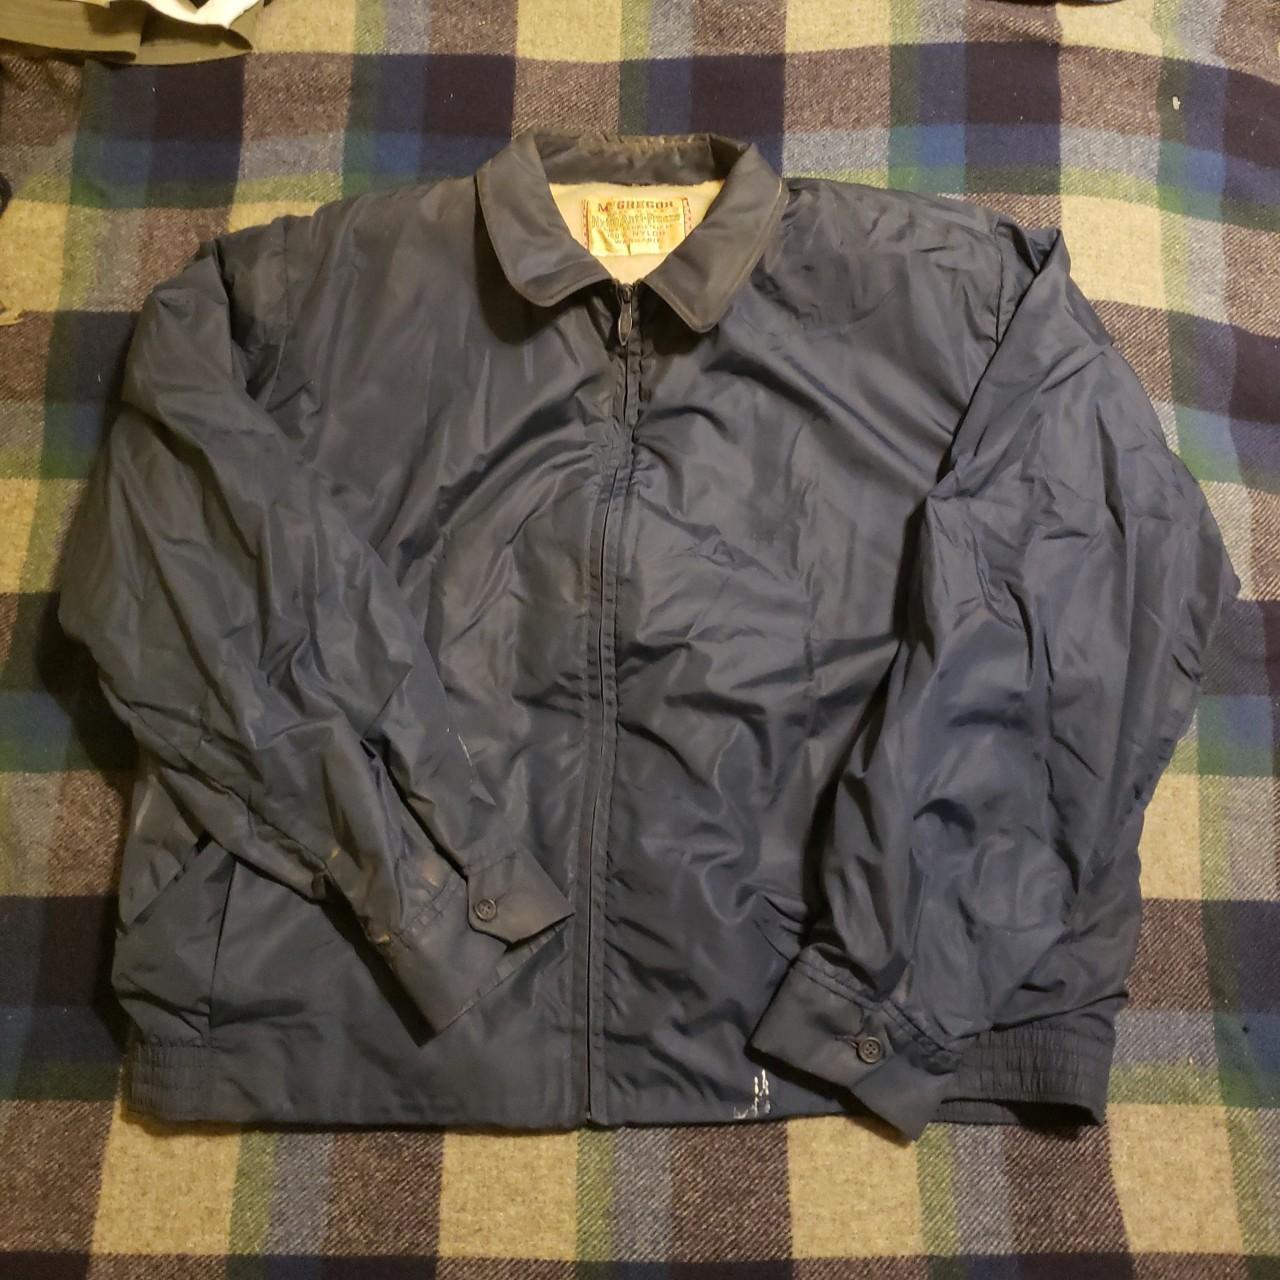 item listed by dripforsalefla